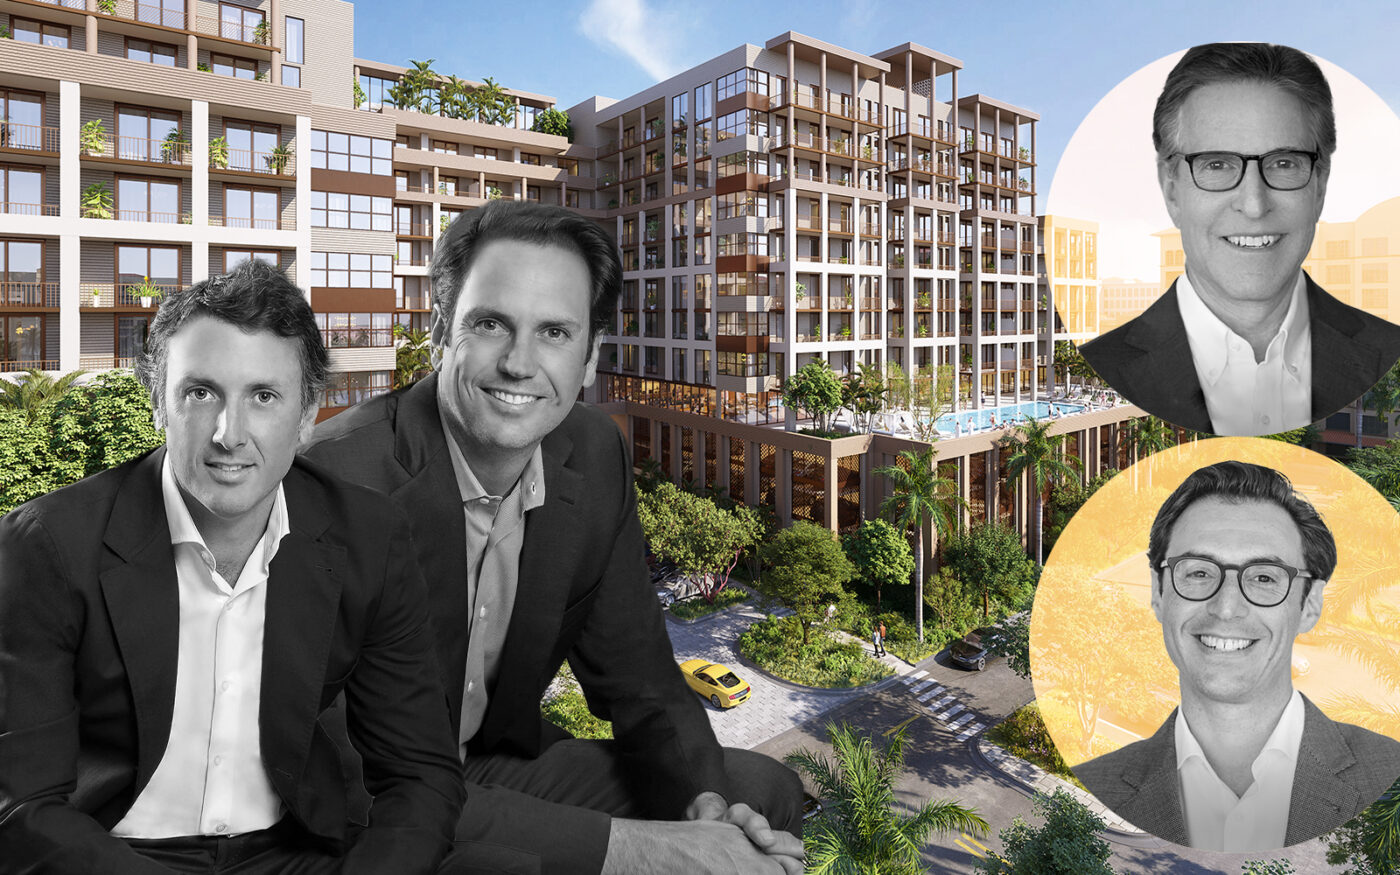 Rendering of plans for the project with Key International’s Diego and Inigo Ardid and Wexford Real Estate Investors’ Joe Jacobs and Phil Braunstein